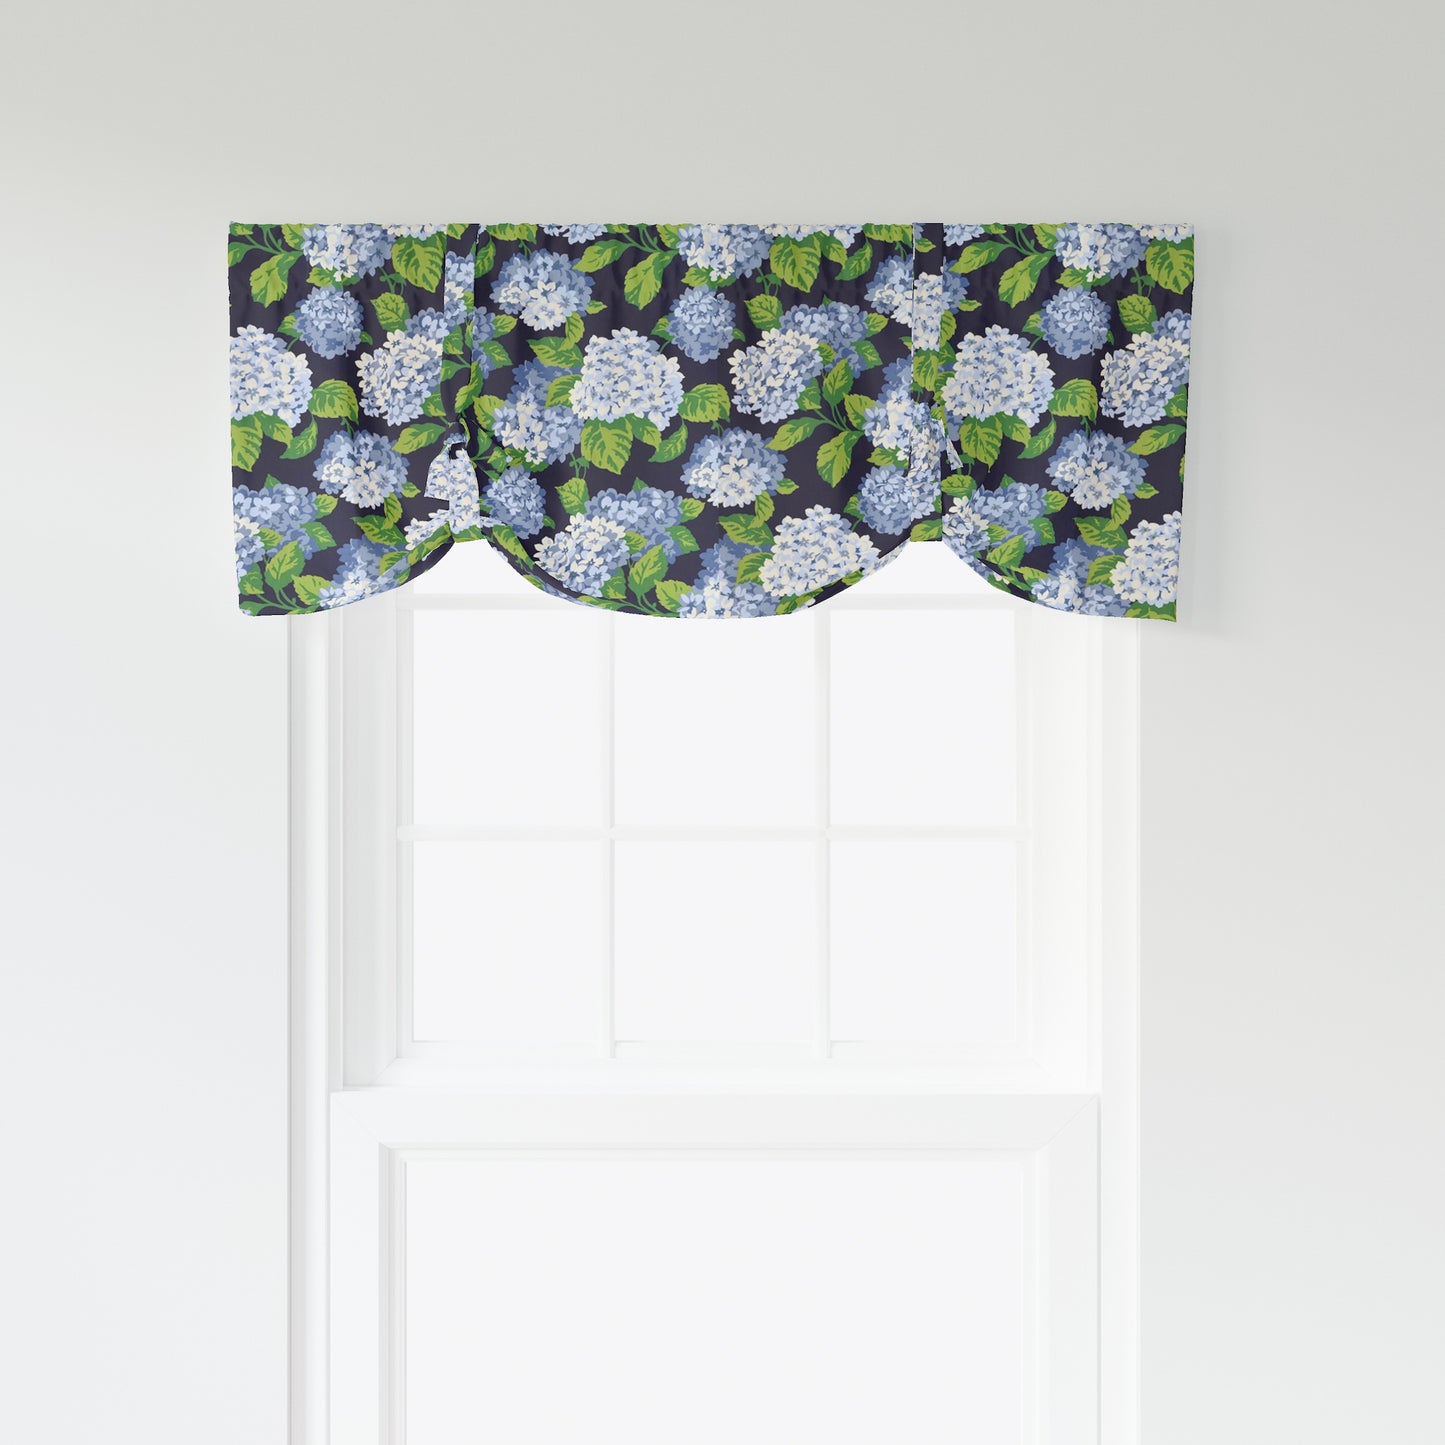 Tie-Up Valance in Summerwind Navy Blue Hydrangea Floral, Large Scale